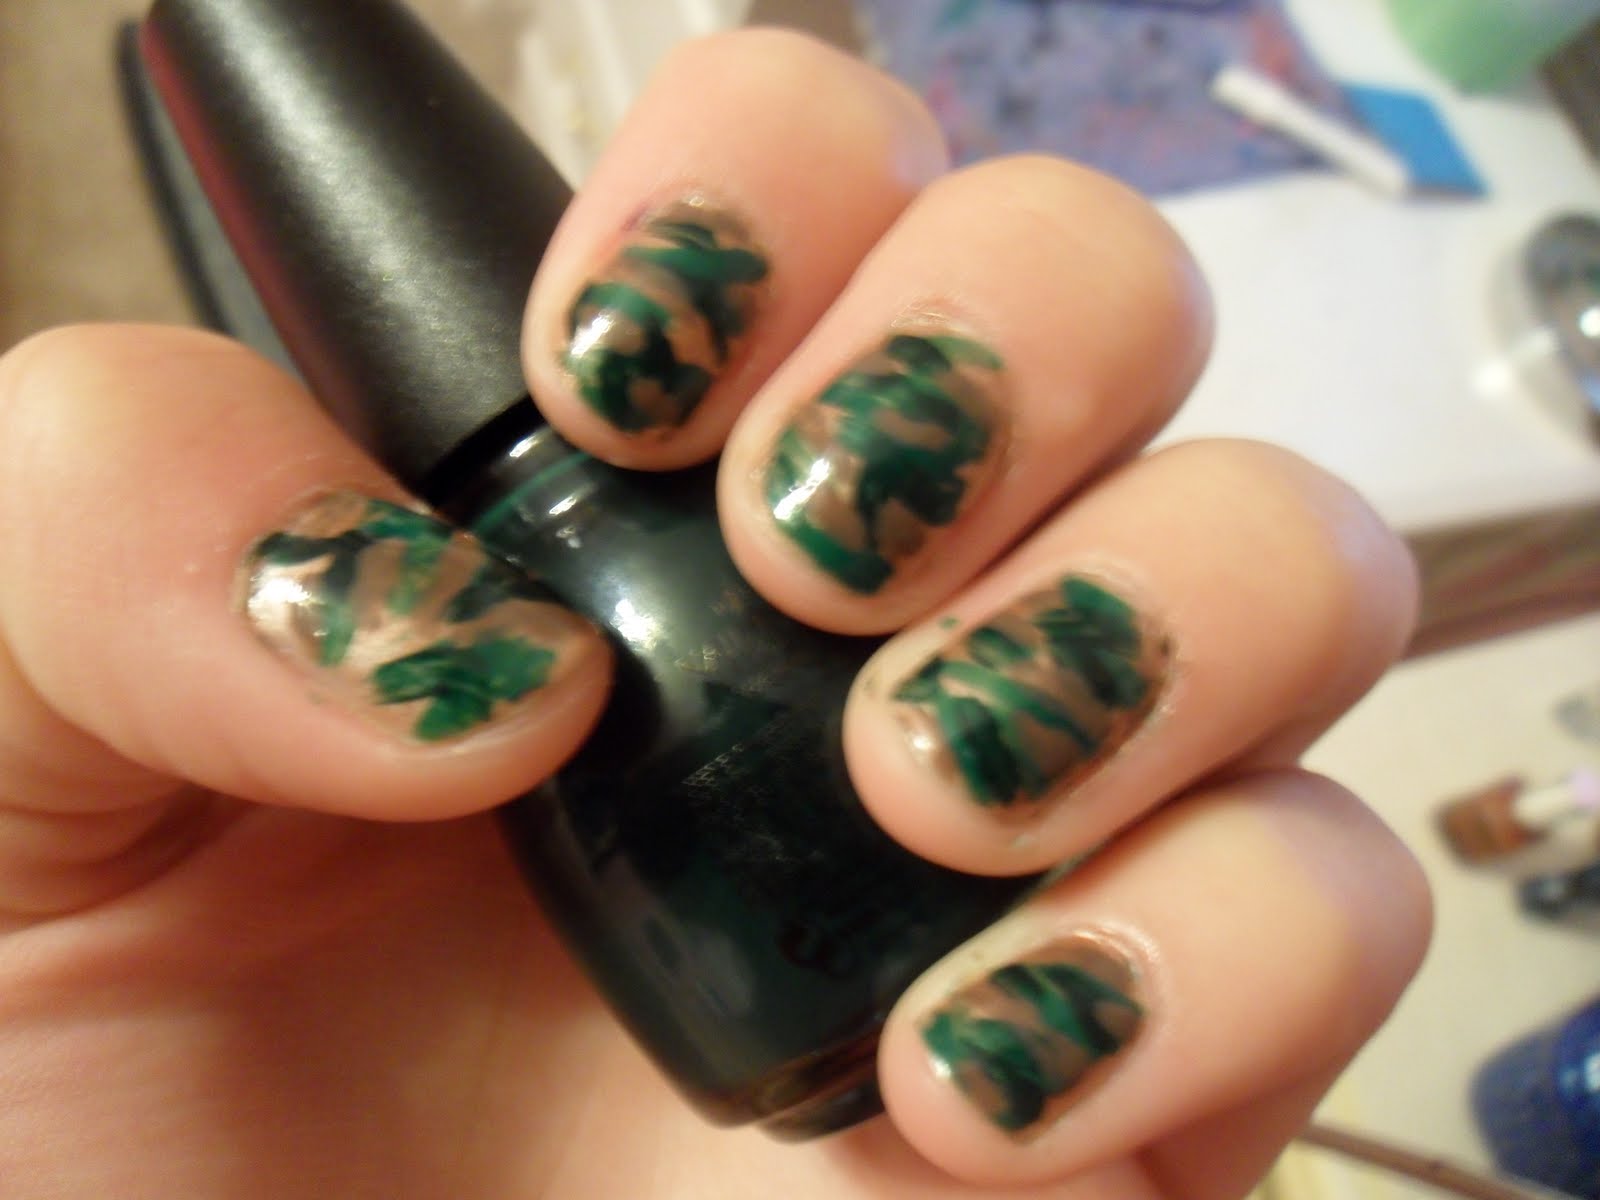 1. Camo Nail Designs on Pinterest - wide 4